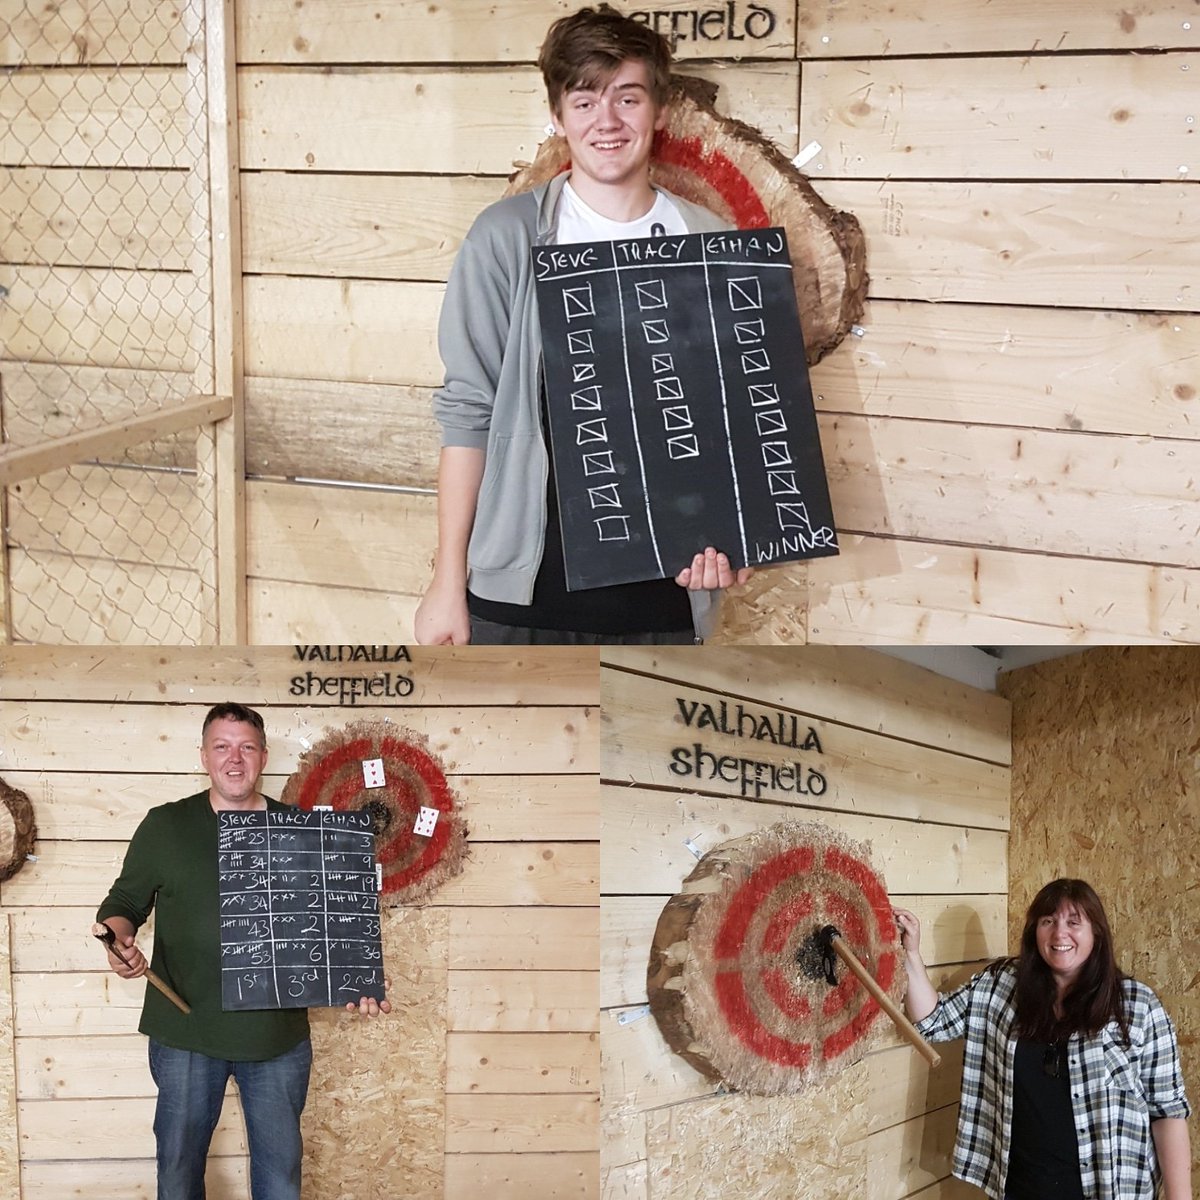 Axe Throwing, the perfect family night out! #bithdaypresent #axethrowing #Sheffield #indooraxethrowing #urbanaxethrowing #Yorkshire #Valhalla #Vikings #atsocialmedia #sheffieldissuper